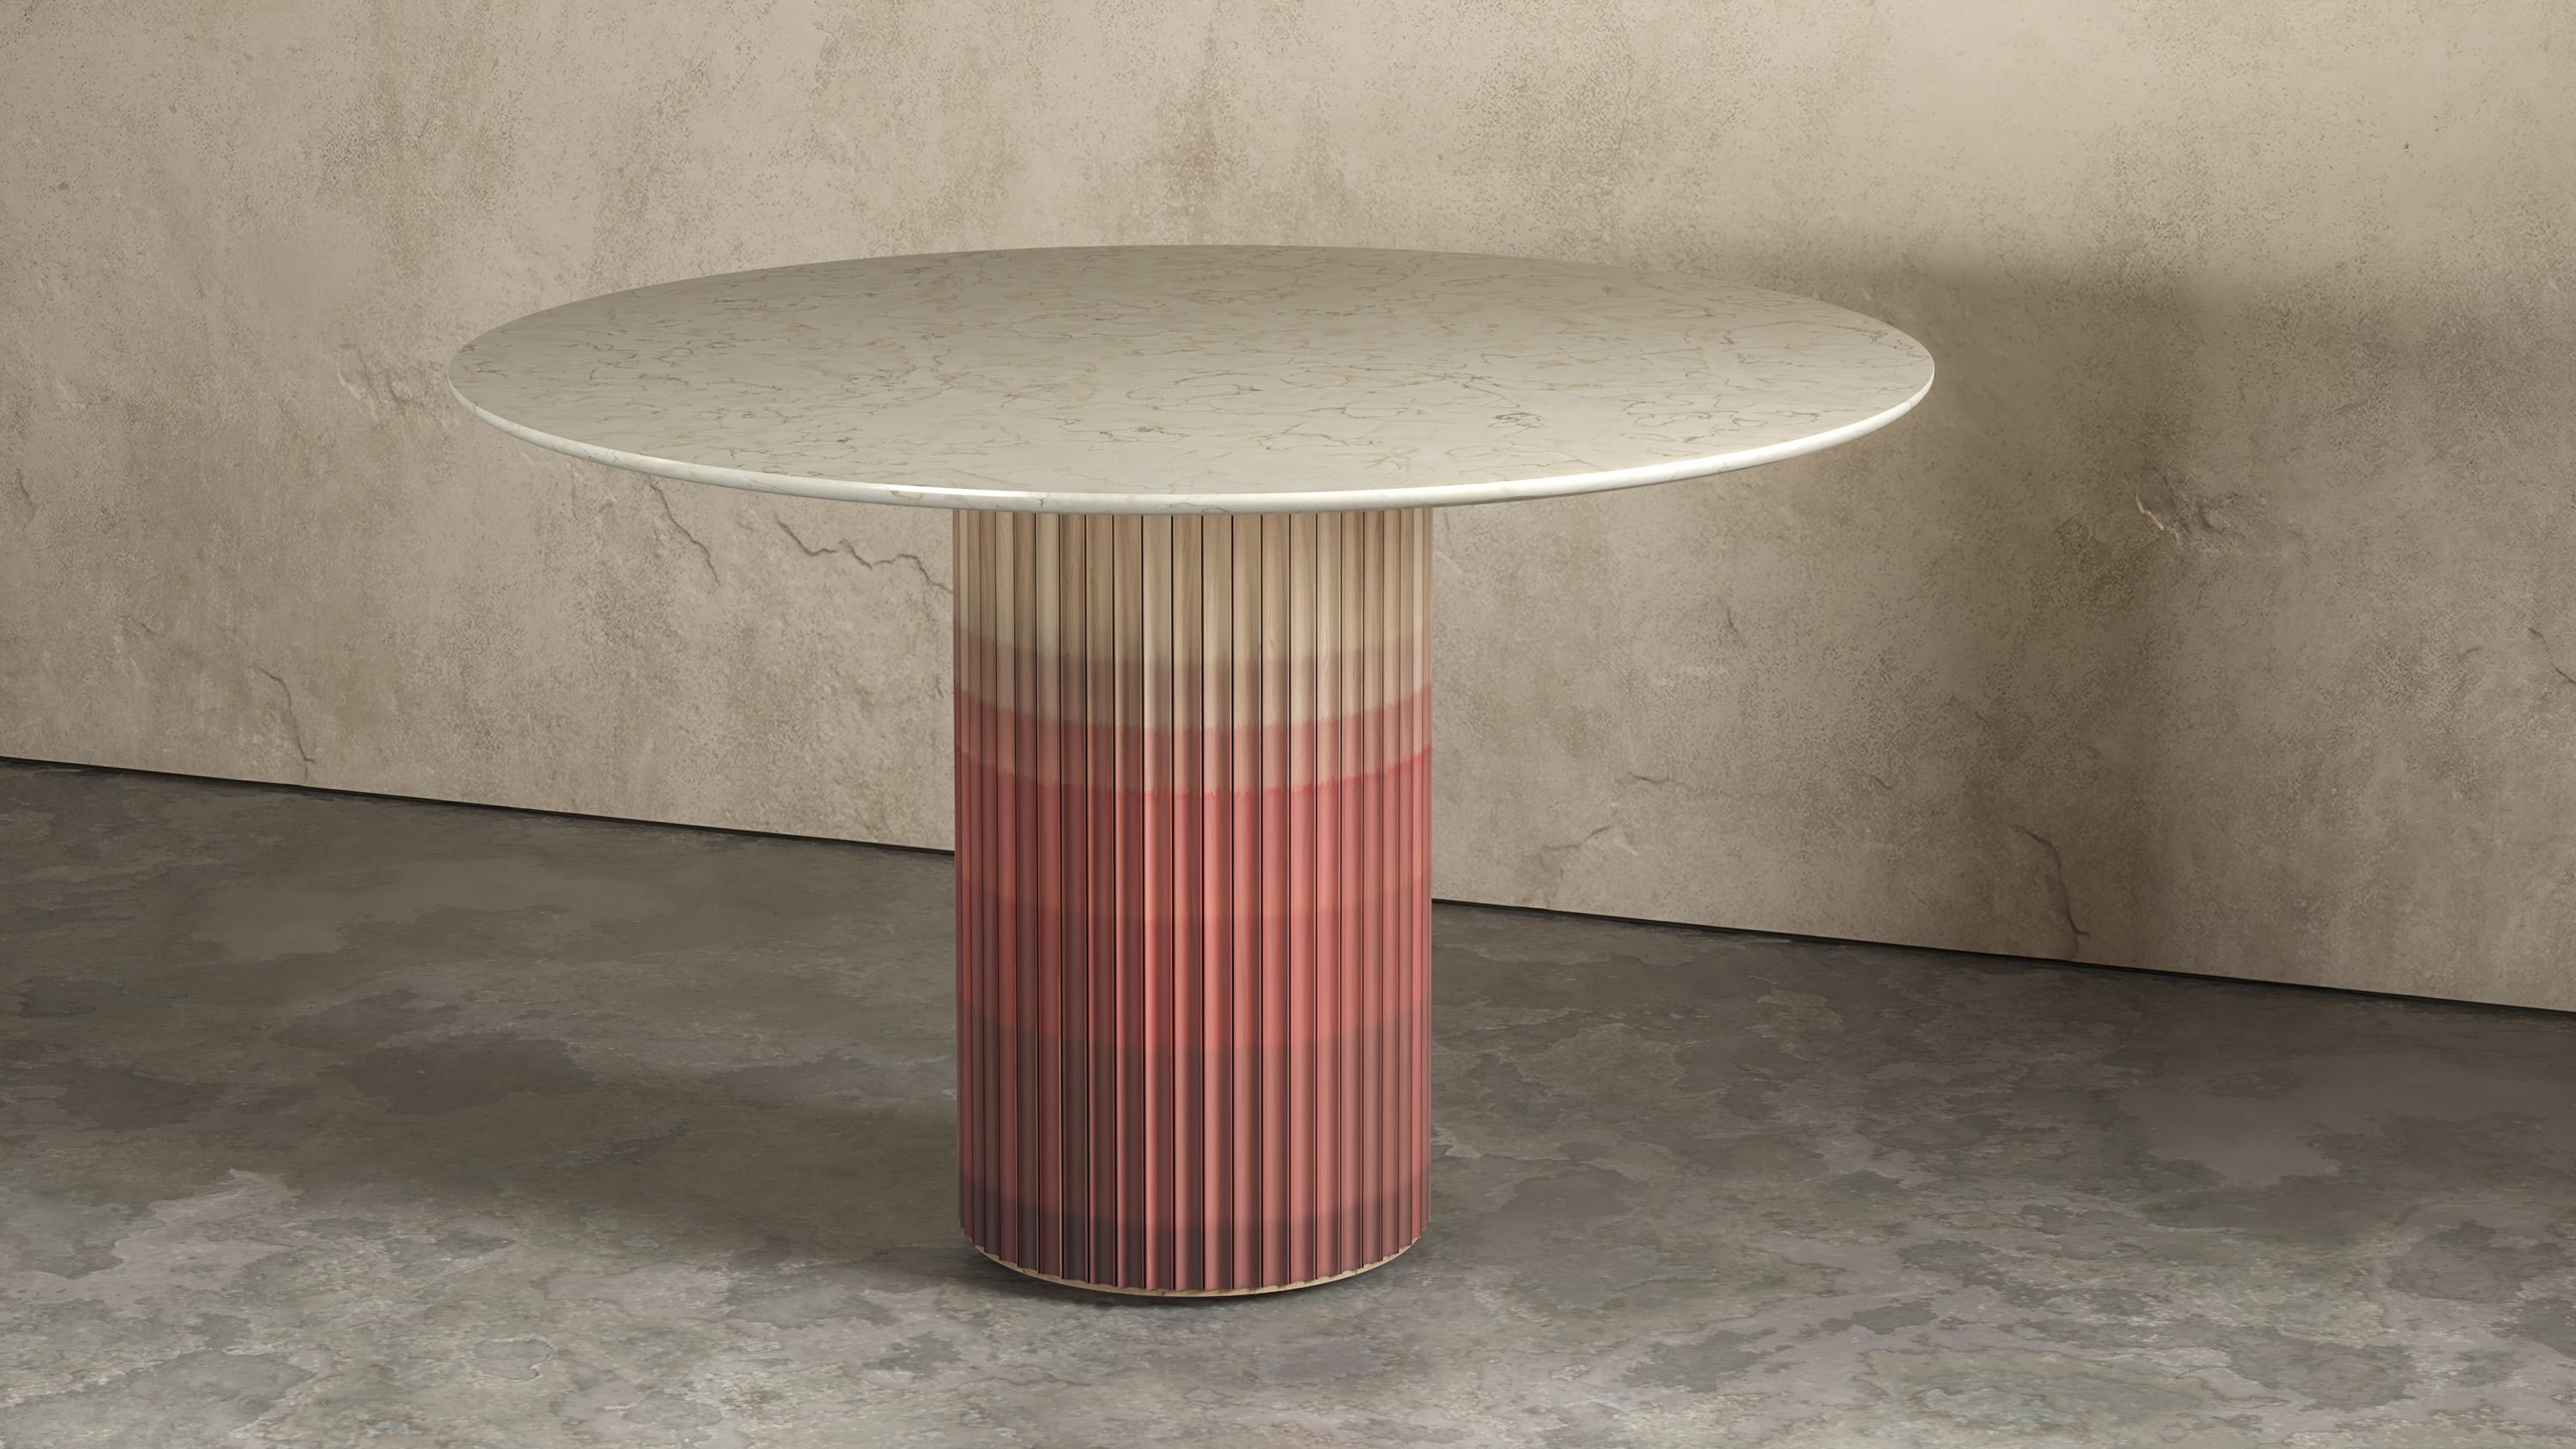 The Pilar Dining Table exudes a sense of subtle elegance and character in the space it inhabits. The table seats four comfortably and can be used in a breakfast nook as well as an center table in entrance foyers.

Apart from the standard colors,